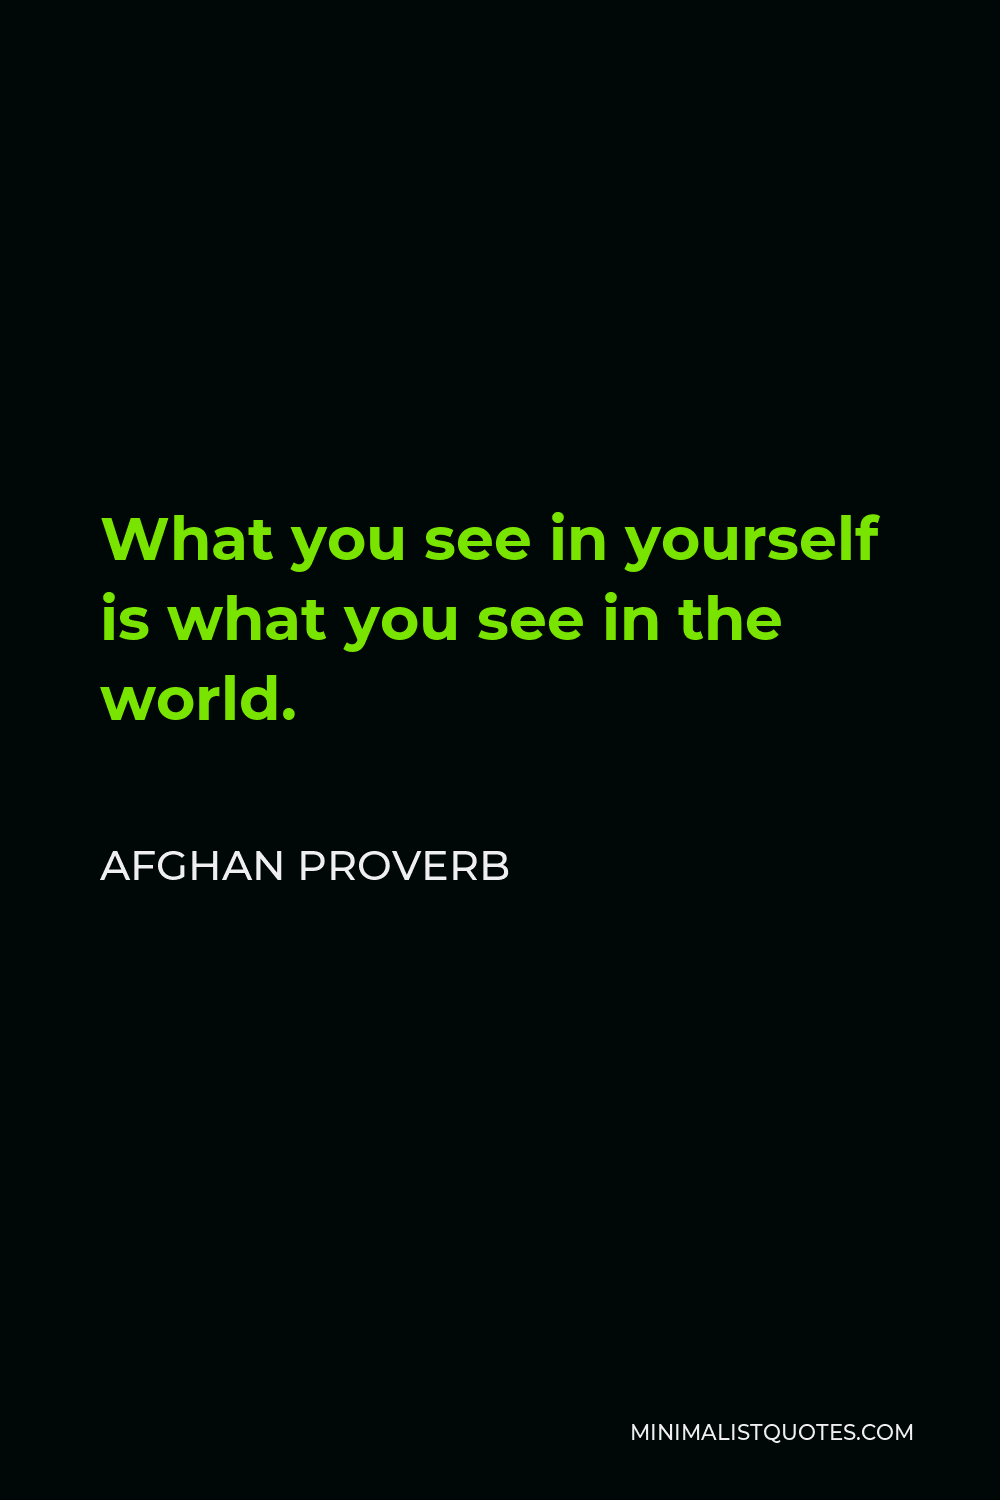 Afghan Proverb Quote - What you see in yourself is what you see in the world.